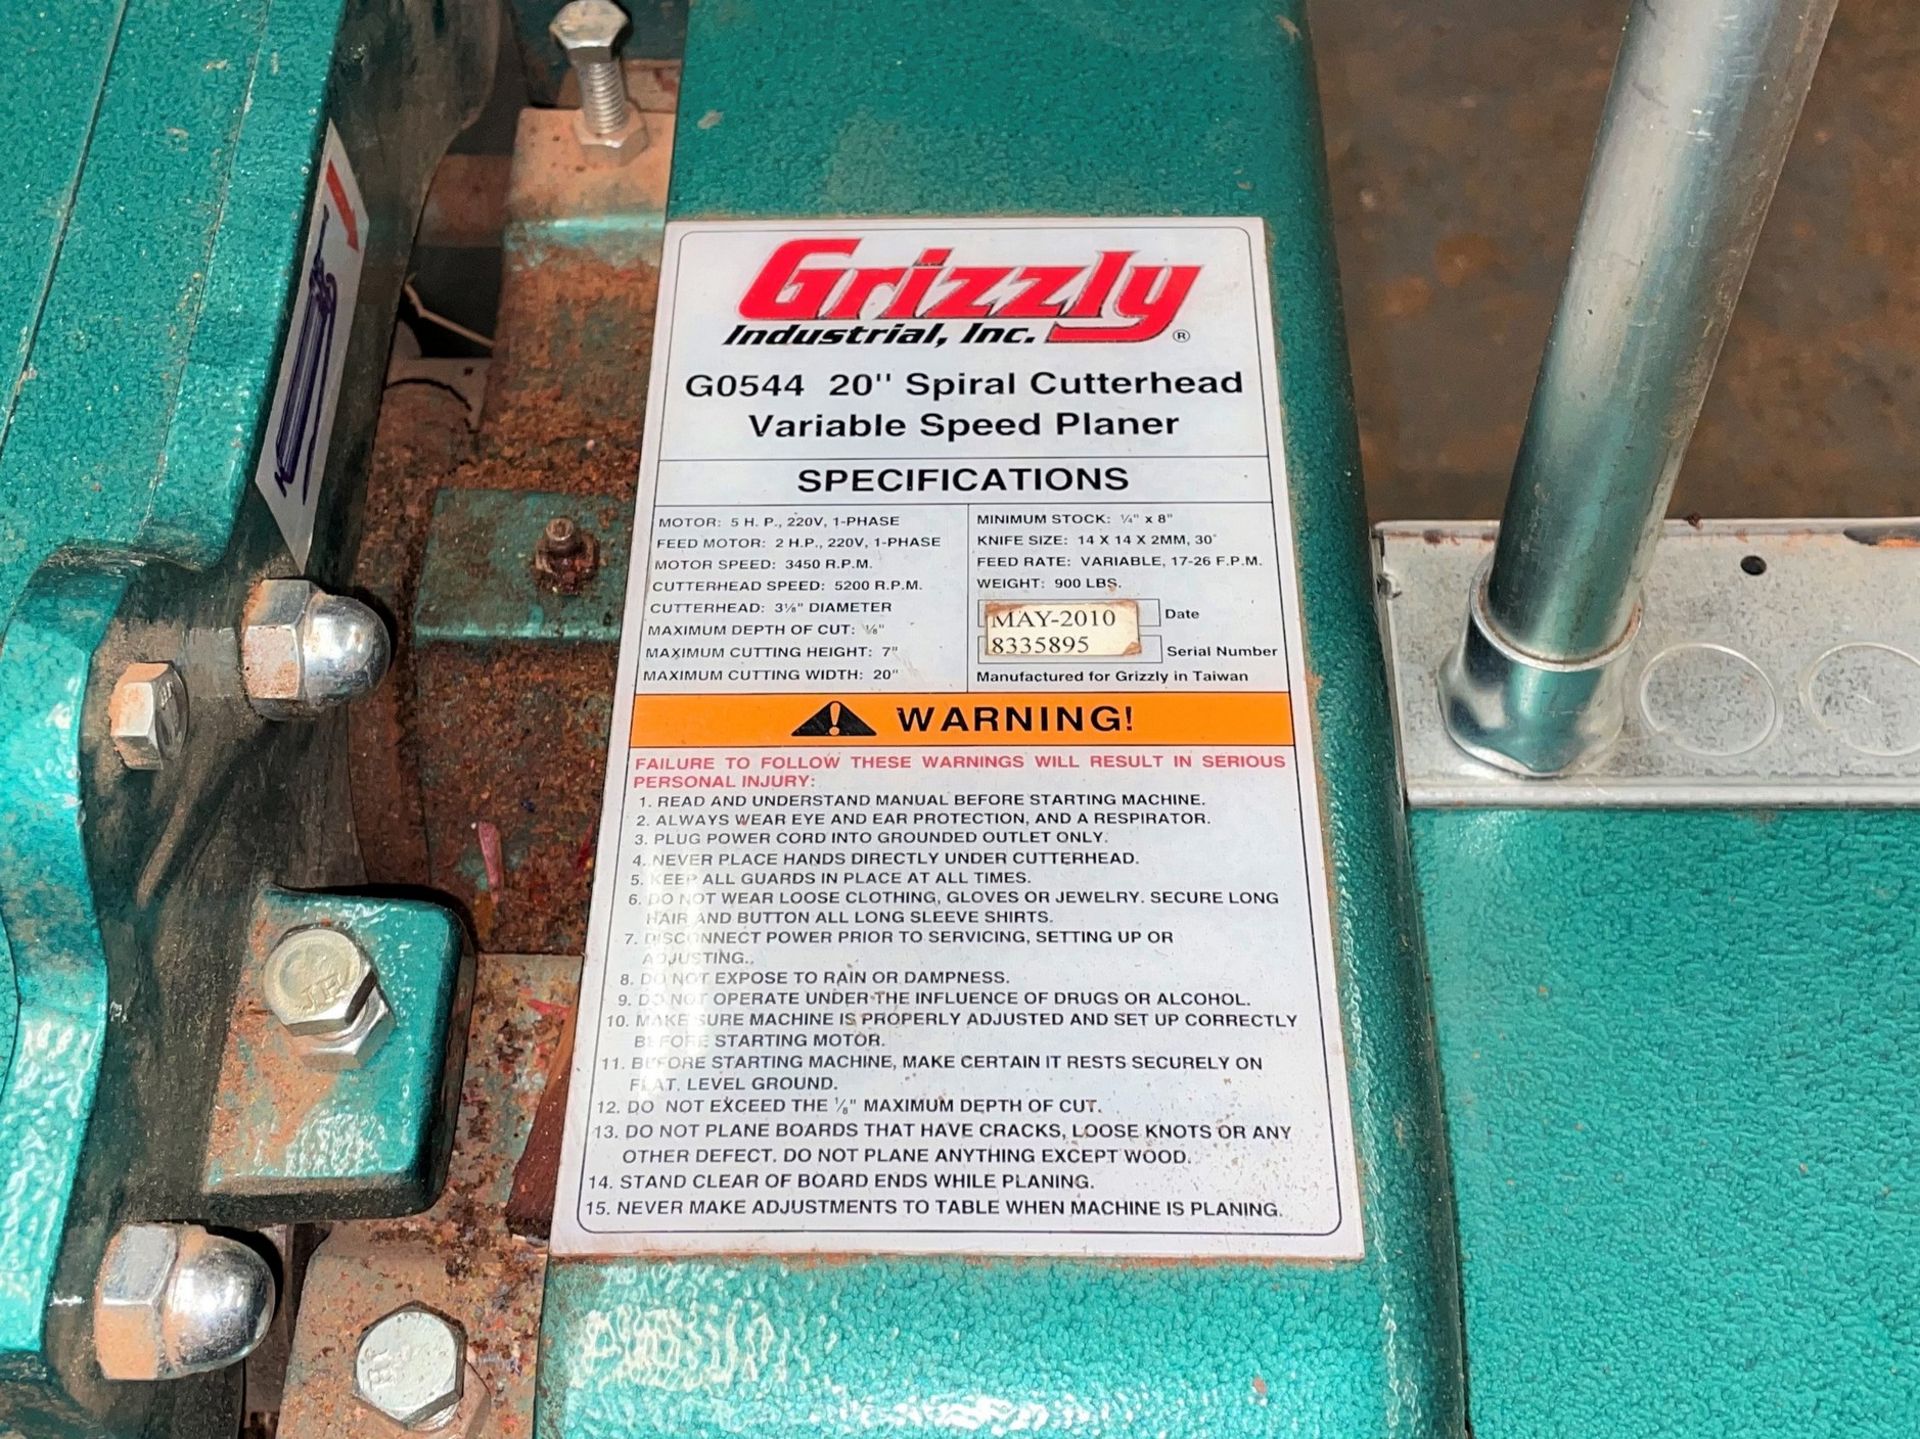 Grizzly Mdl. G0544 20" 5HP Pro Spiral Cutterhead Variable Speed Planer - Image 8 of 8